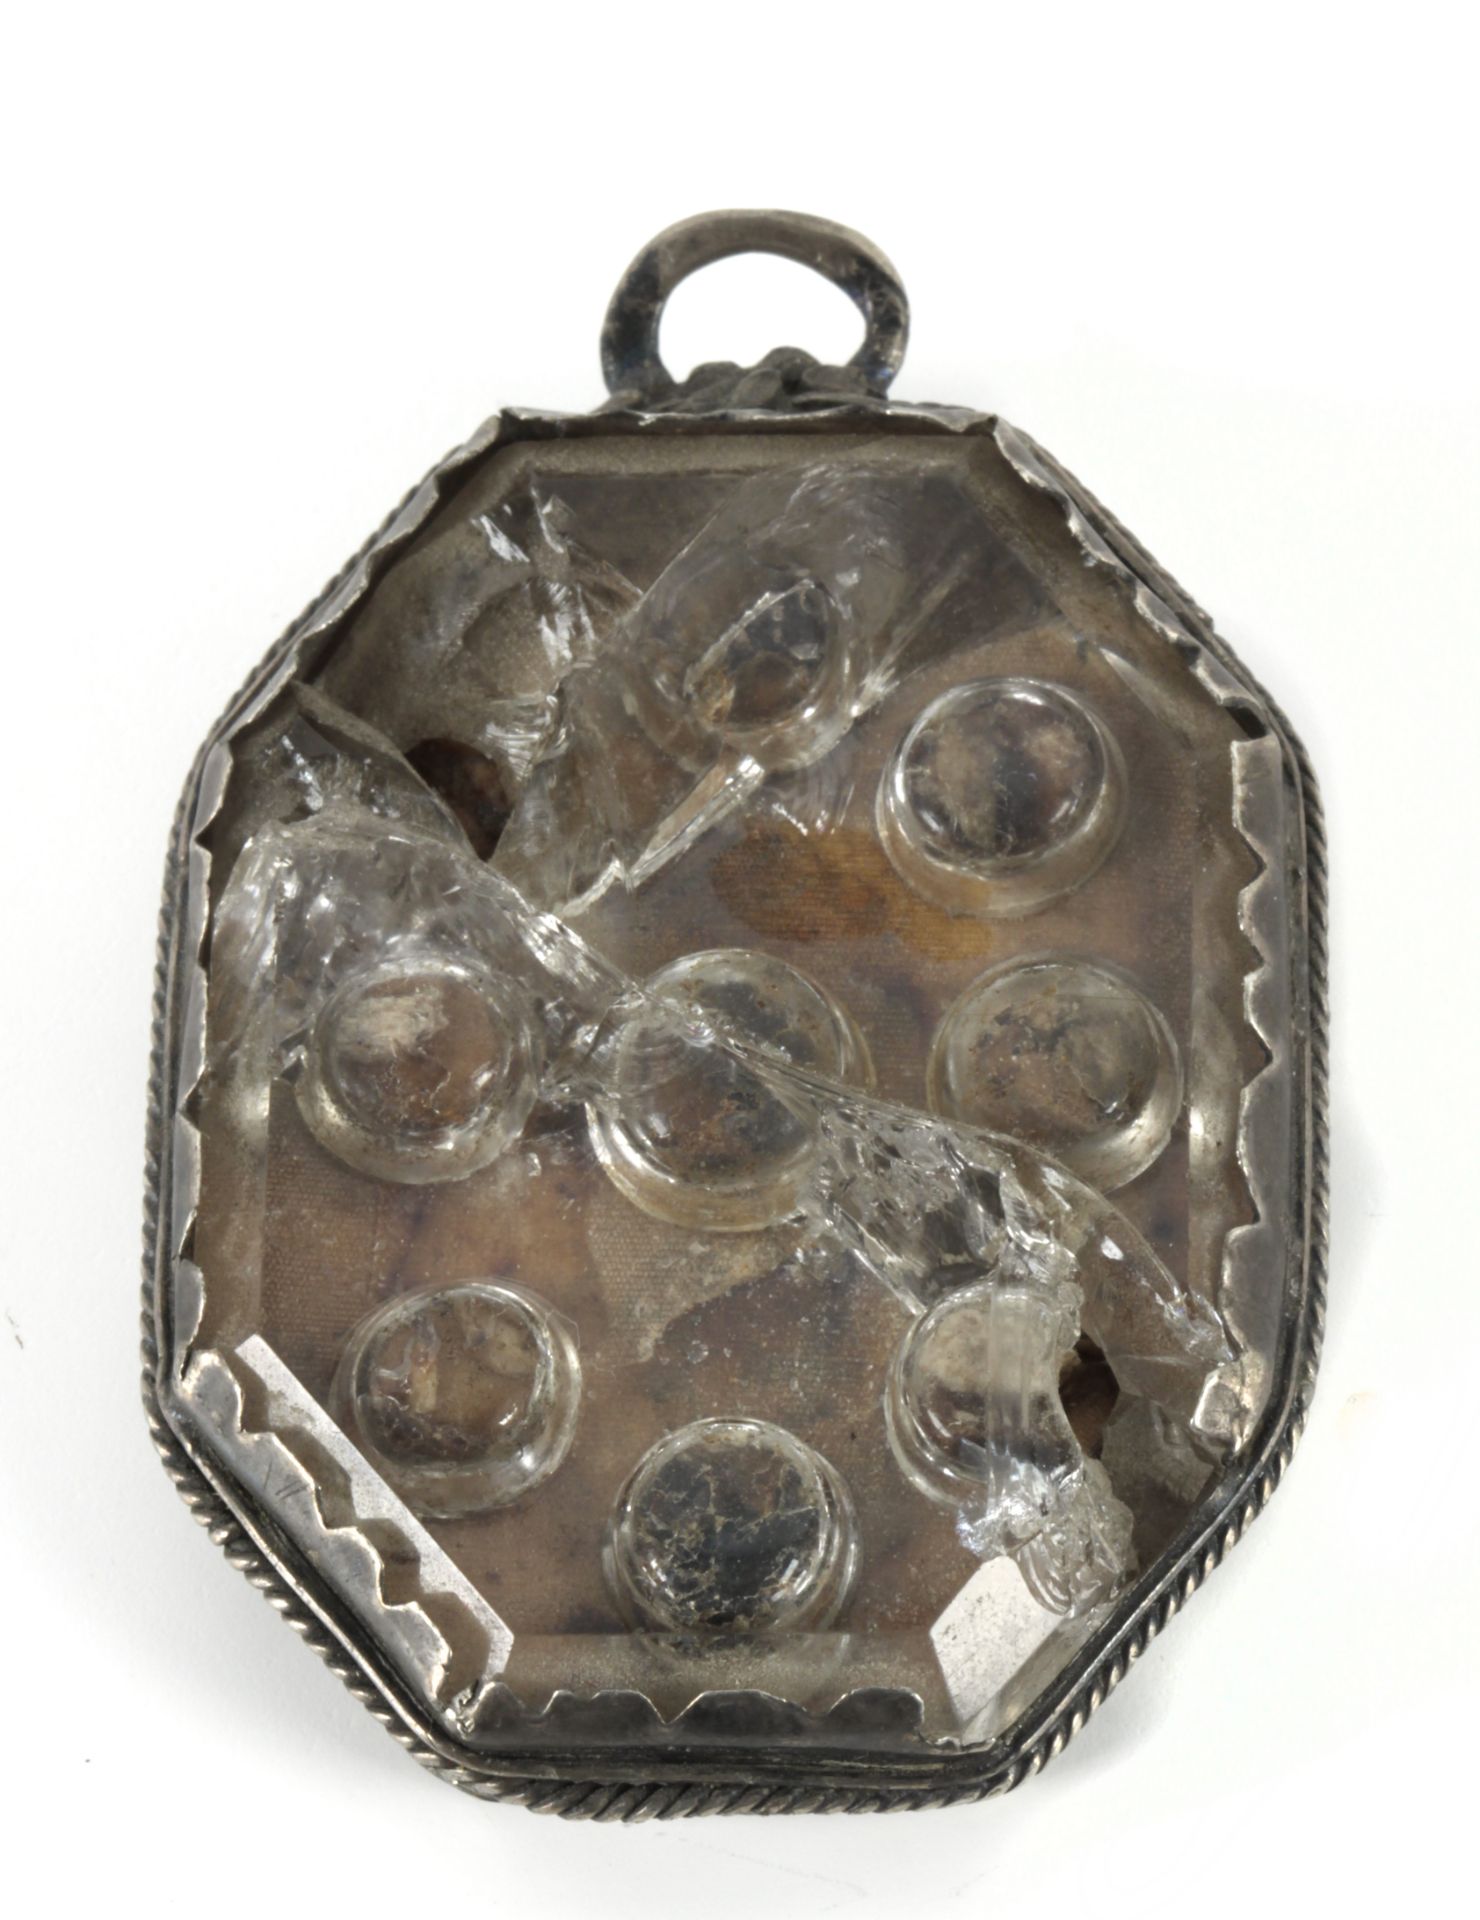 A pair of 17th century Spanish silver reliquary pendants